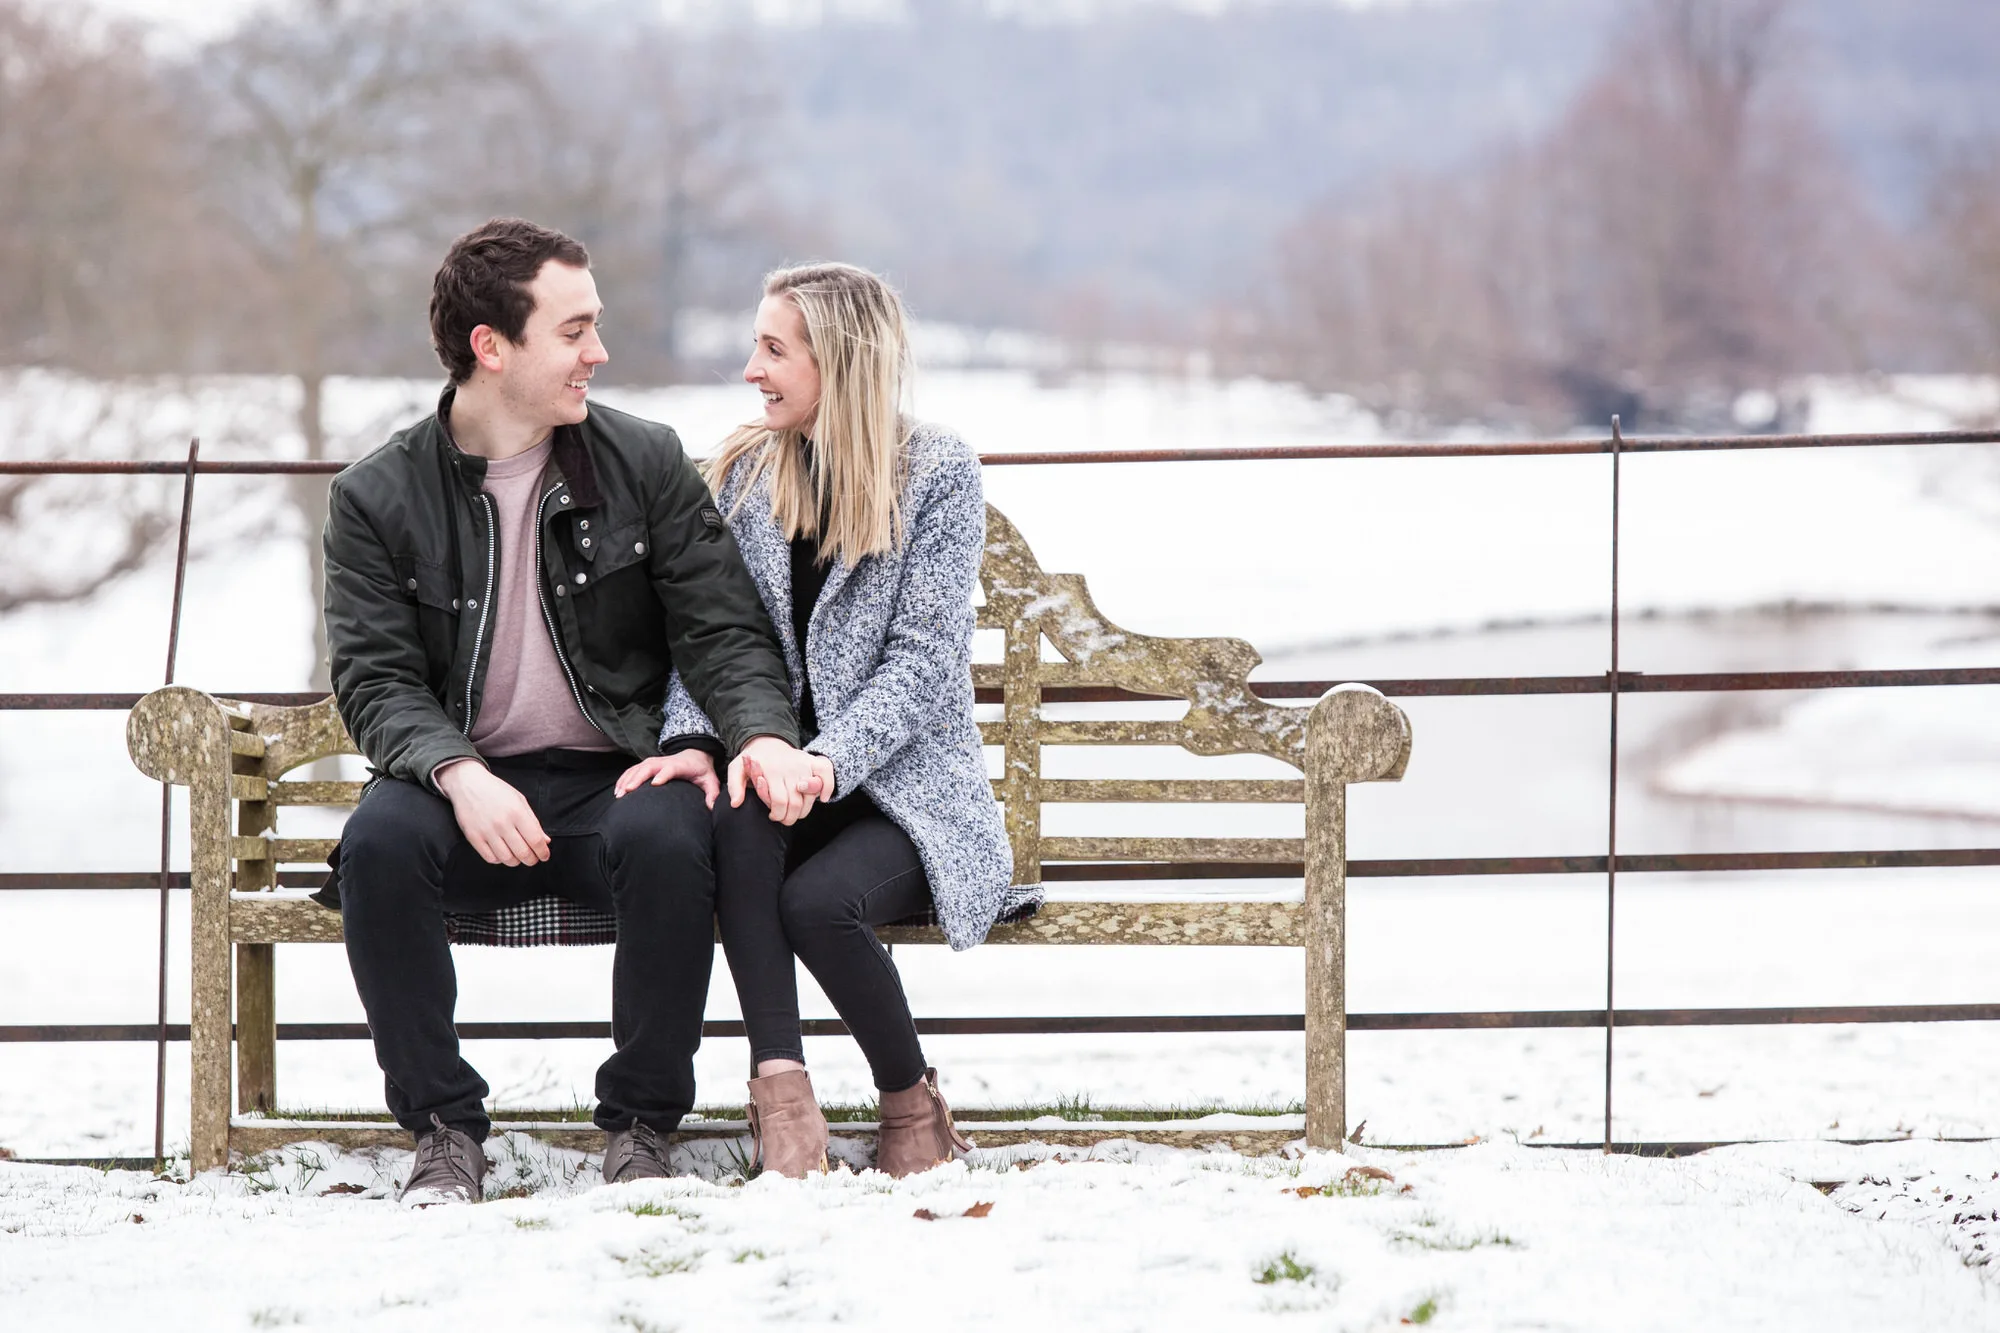 Engagement Photo Shoot - couple sitting together on a bench in the snow in the countryside of East Sussex